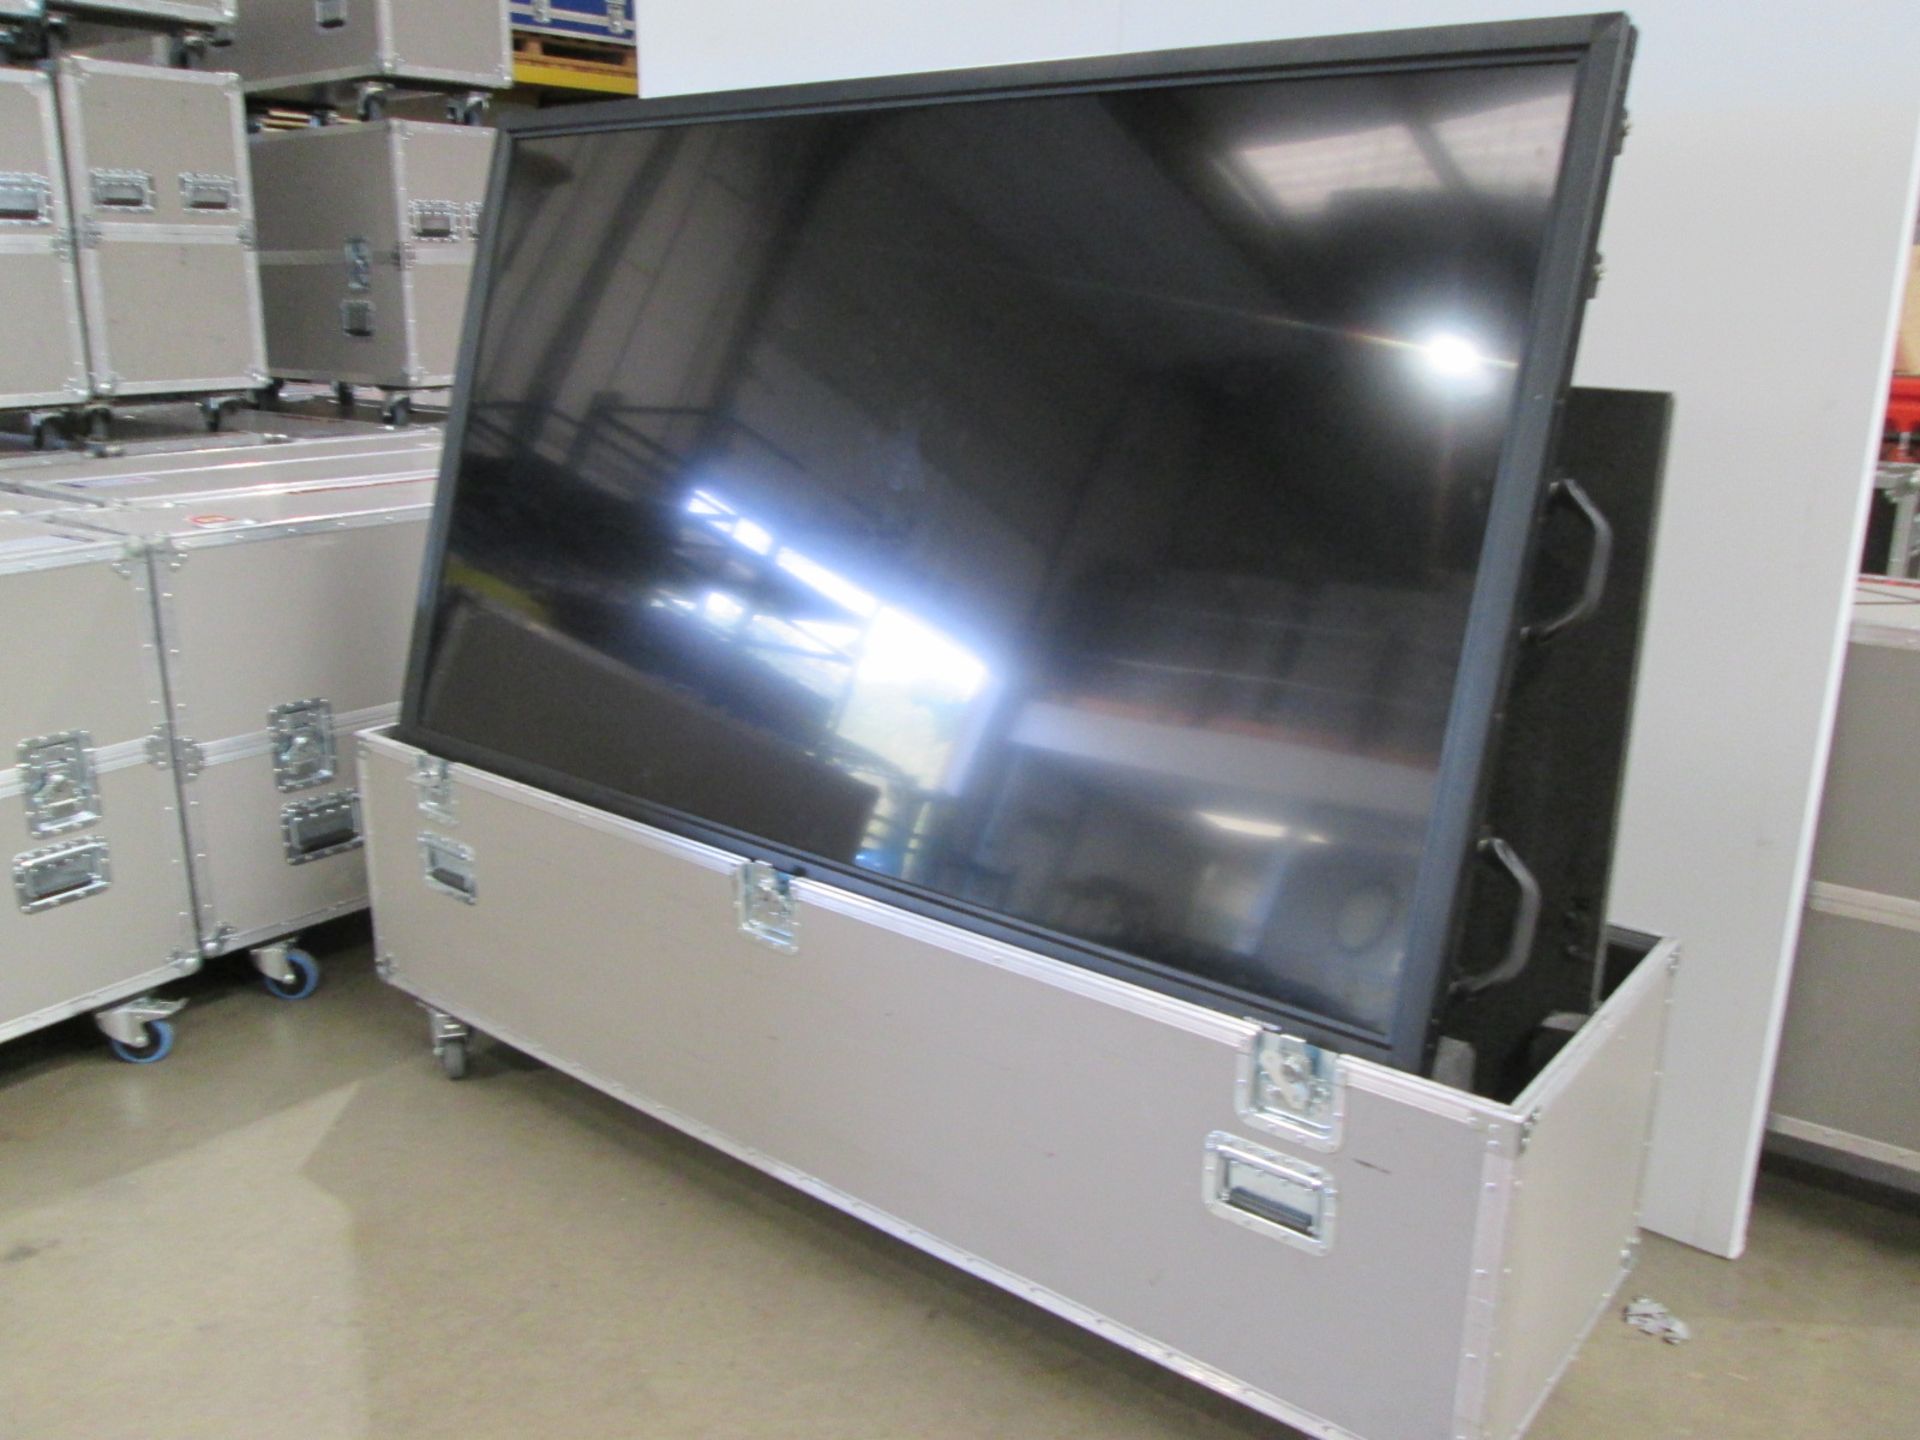 Sharp 80" Colour Monitor, Model PN-E802, S/N 54000021, In flight case with back plate and remote - Image 2 of 5